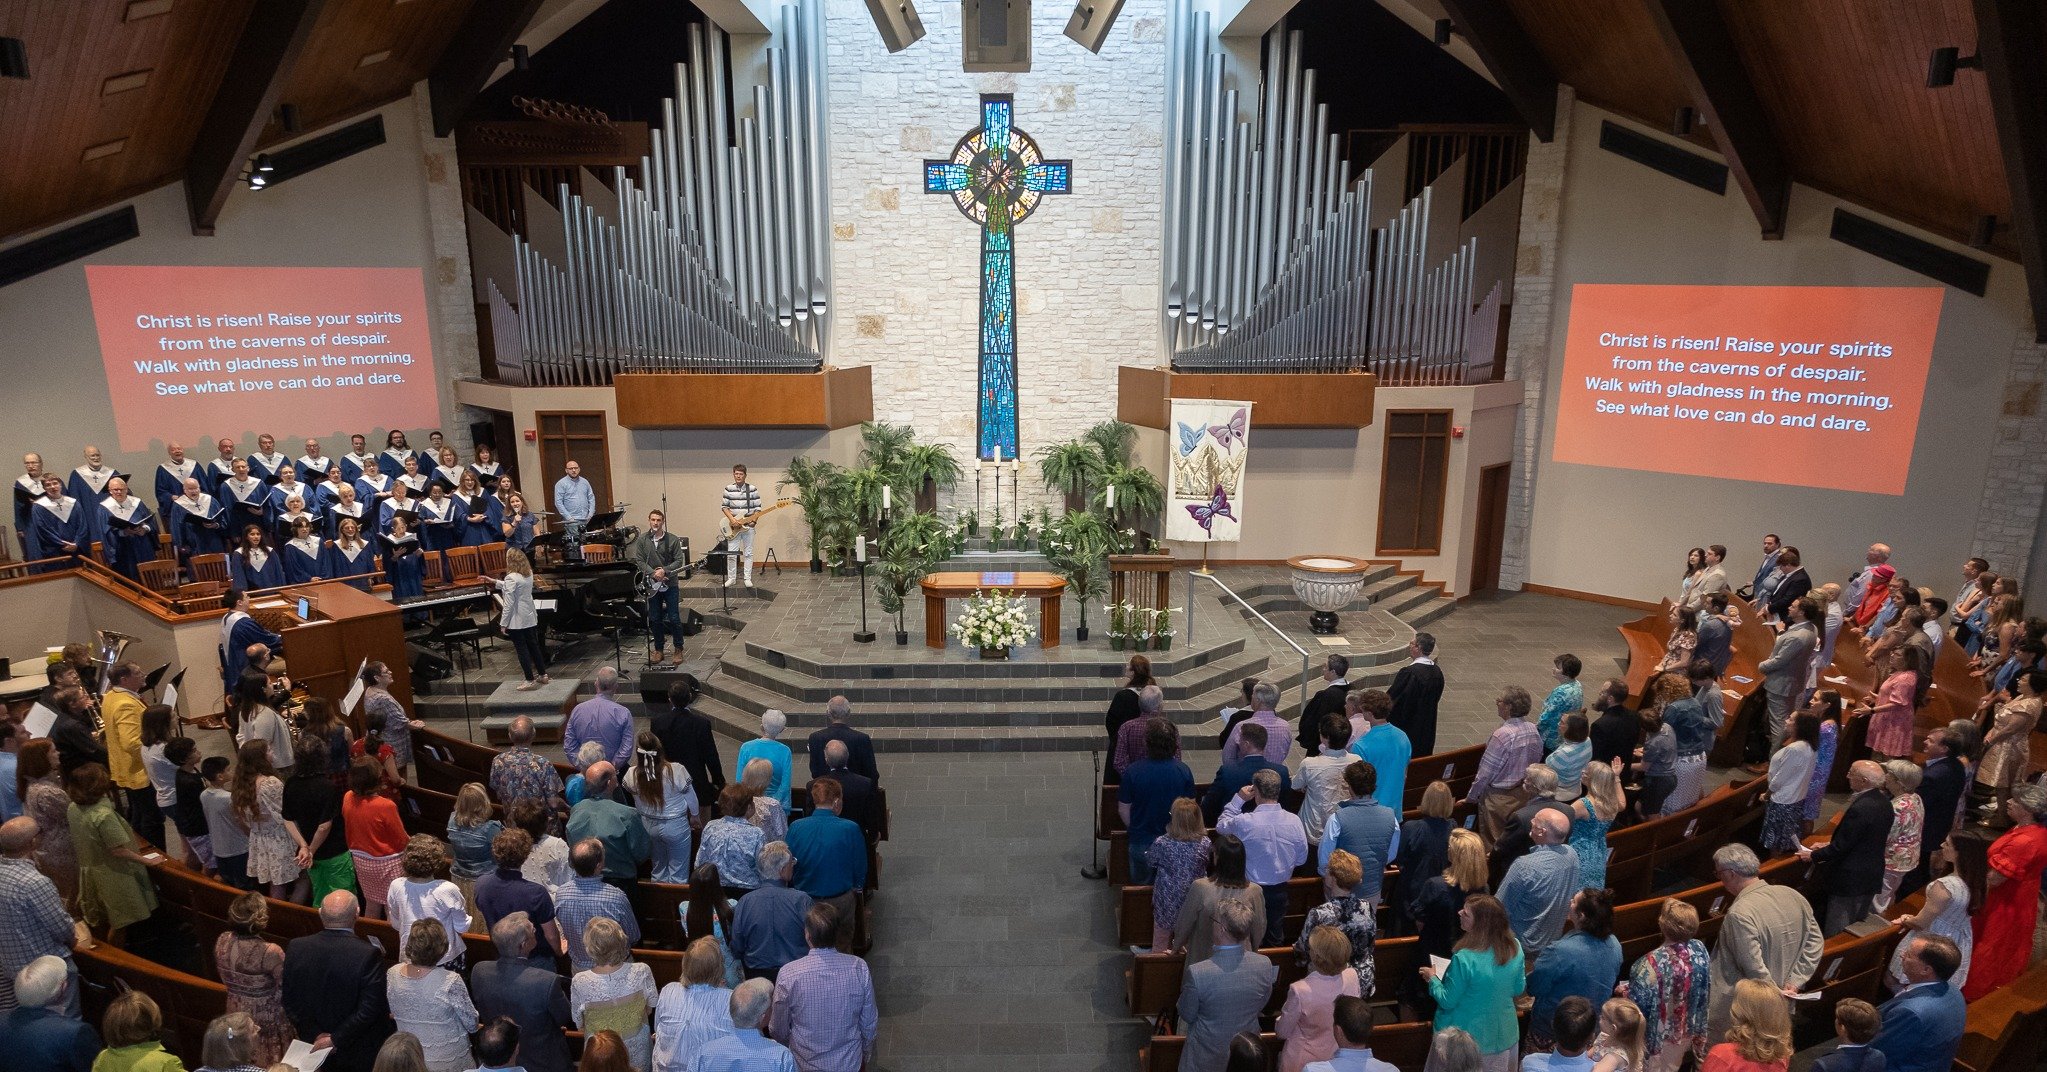 Thank you Faith Family! Your presence this Easter worship made our celebration even more special. Together, we rejoiced in the resurrection of Jesus and the hope He brings. Let's carry this spirit of love and renewal with us throughout the year. Wish